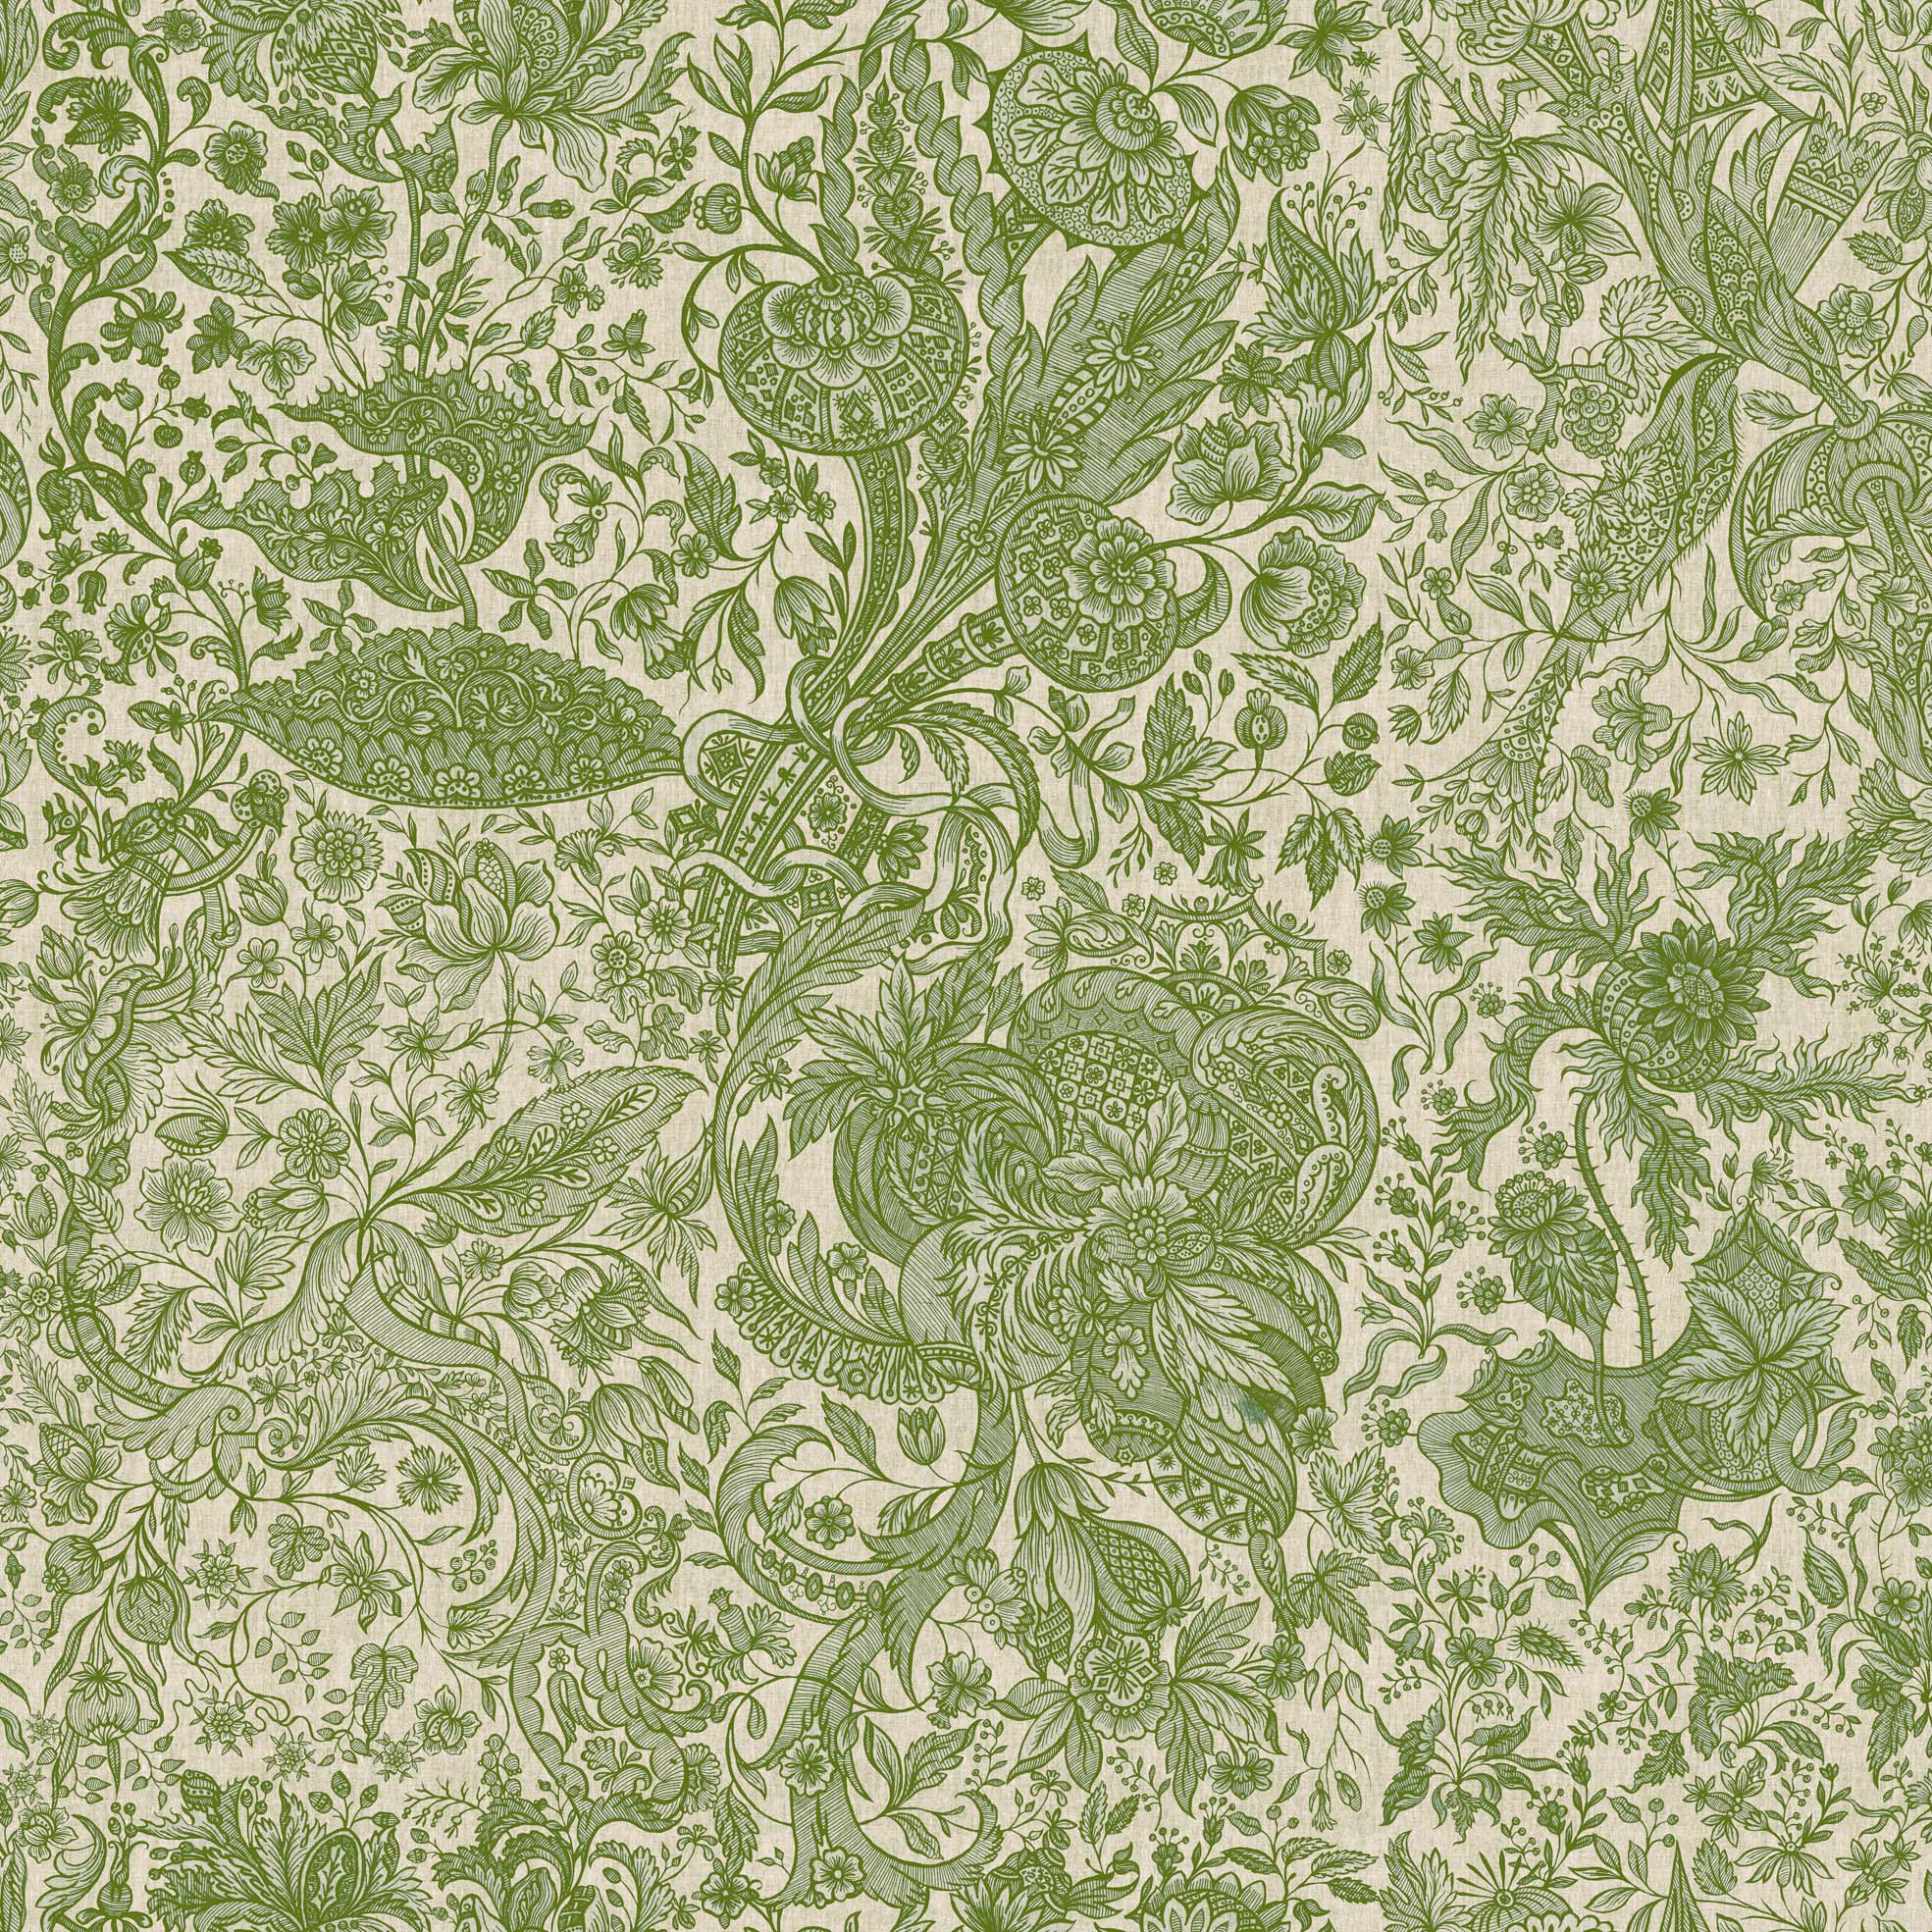 images/productimages/small/sarkozi-embroidery-herbal-52x50cm-wp30026-wallpaper.jpg